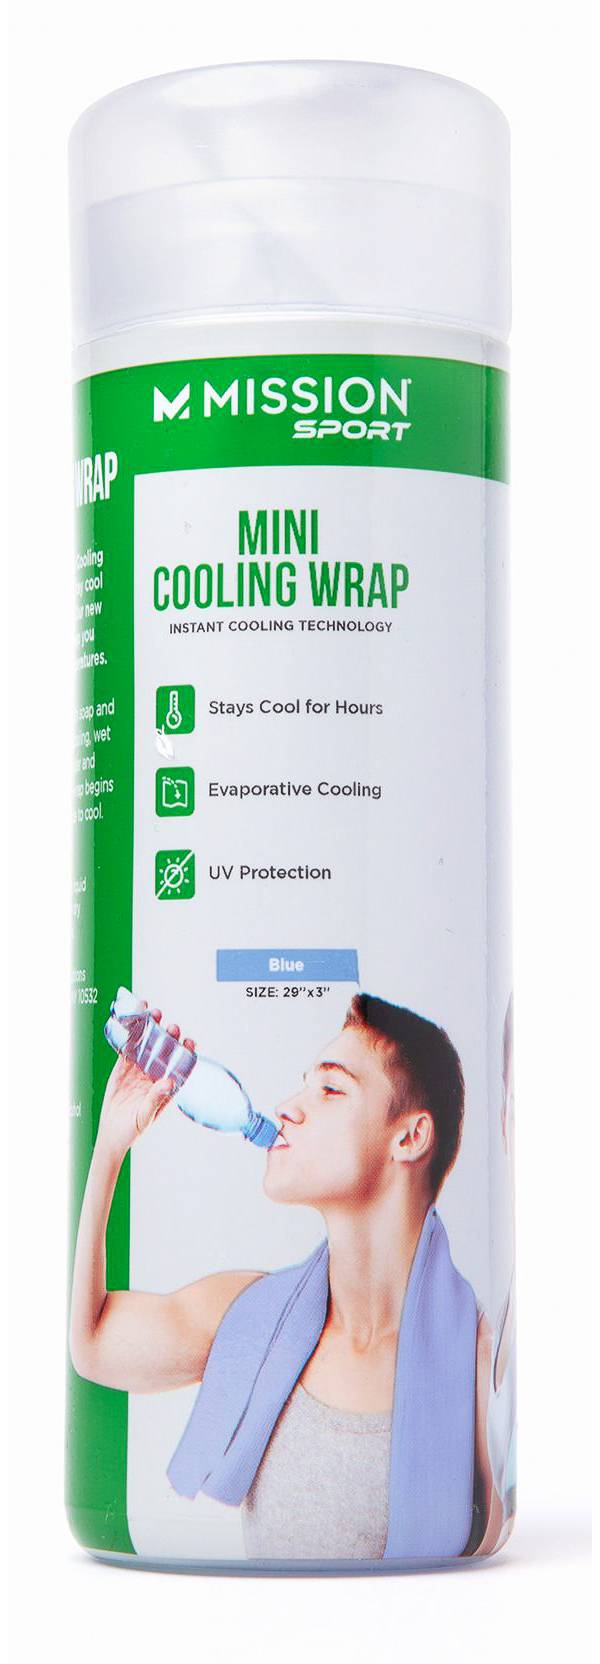 MISSION Sport Mini Cooling Wrap product image